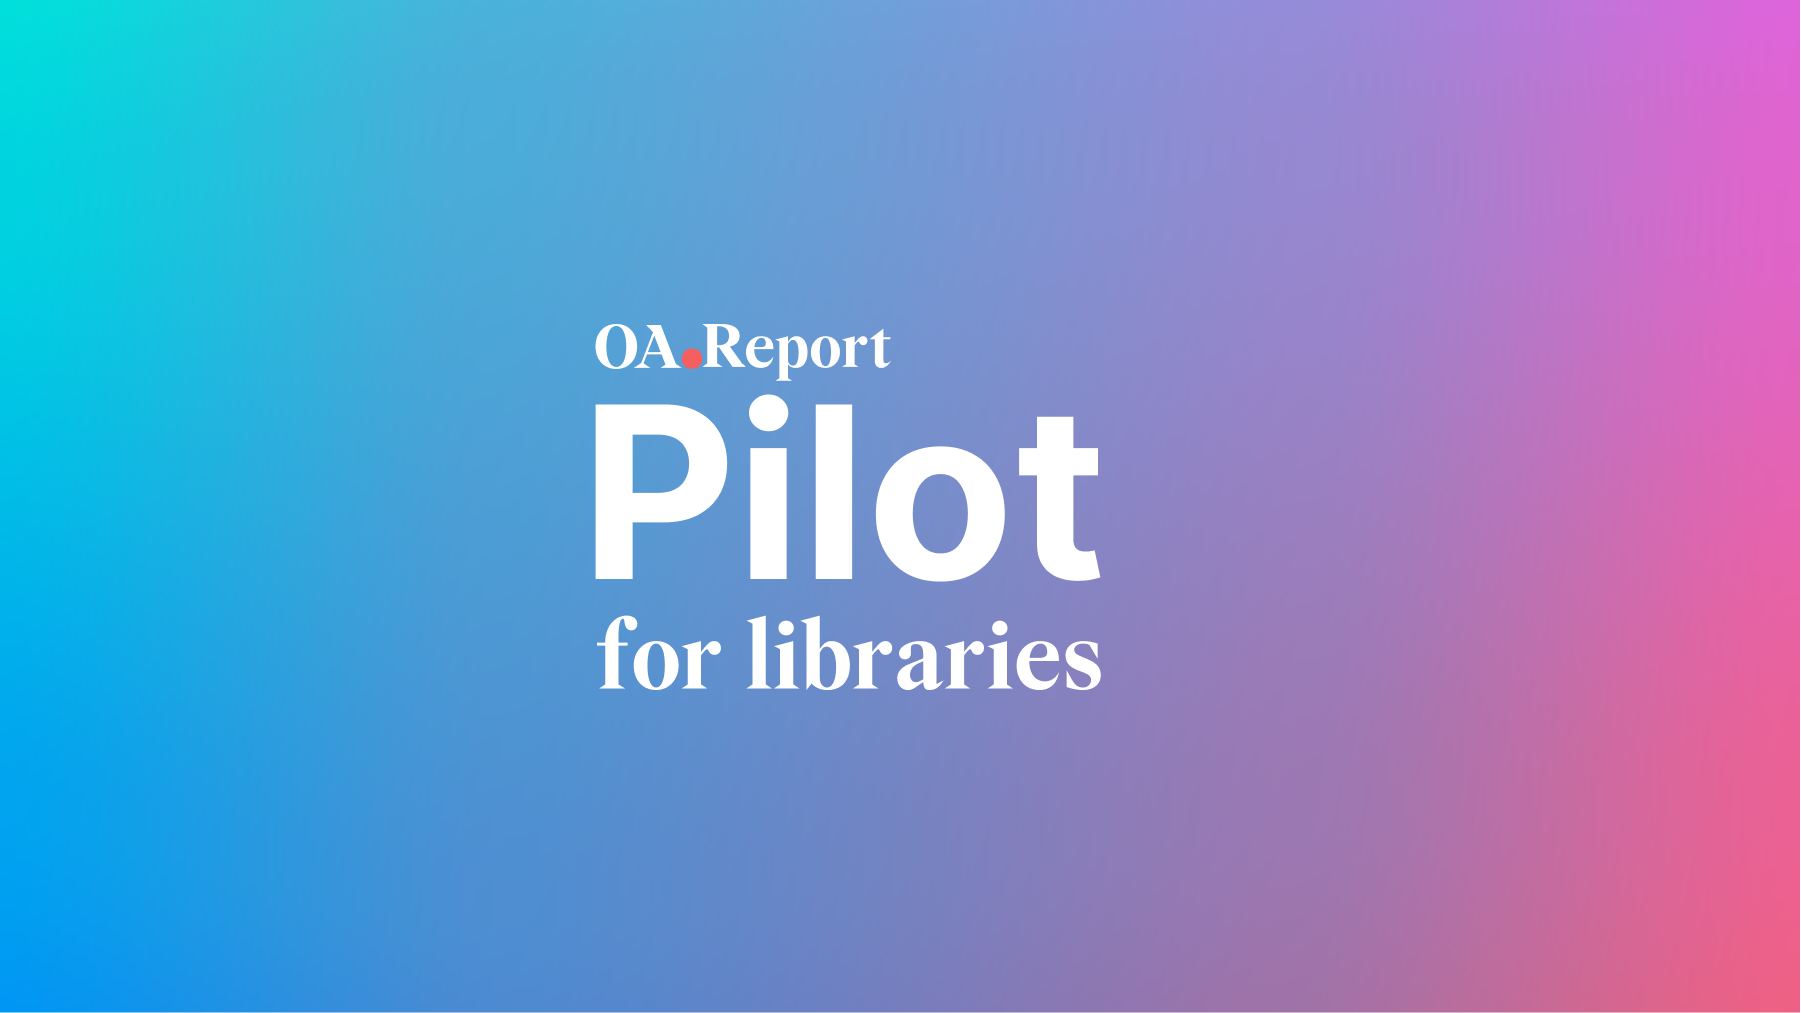 The text ”OA.Report for libraries pilot” is imposed on a multi-colored background.